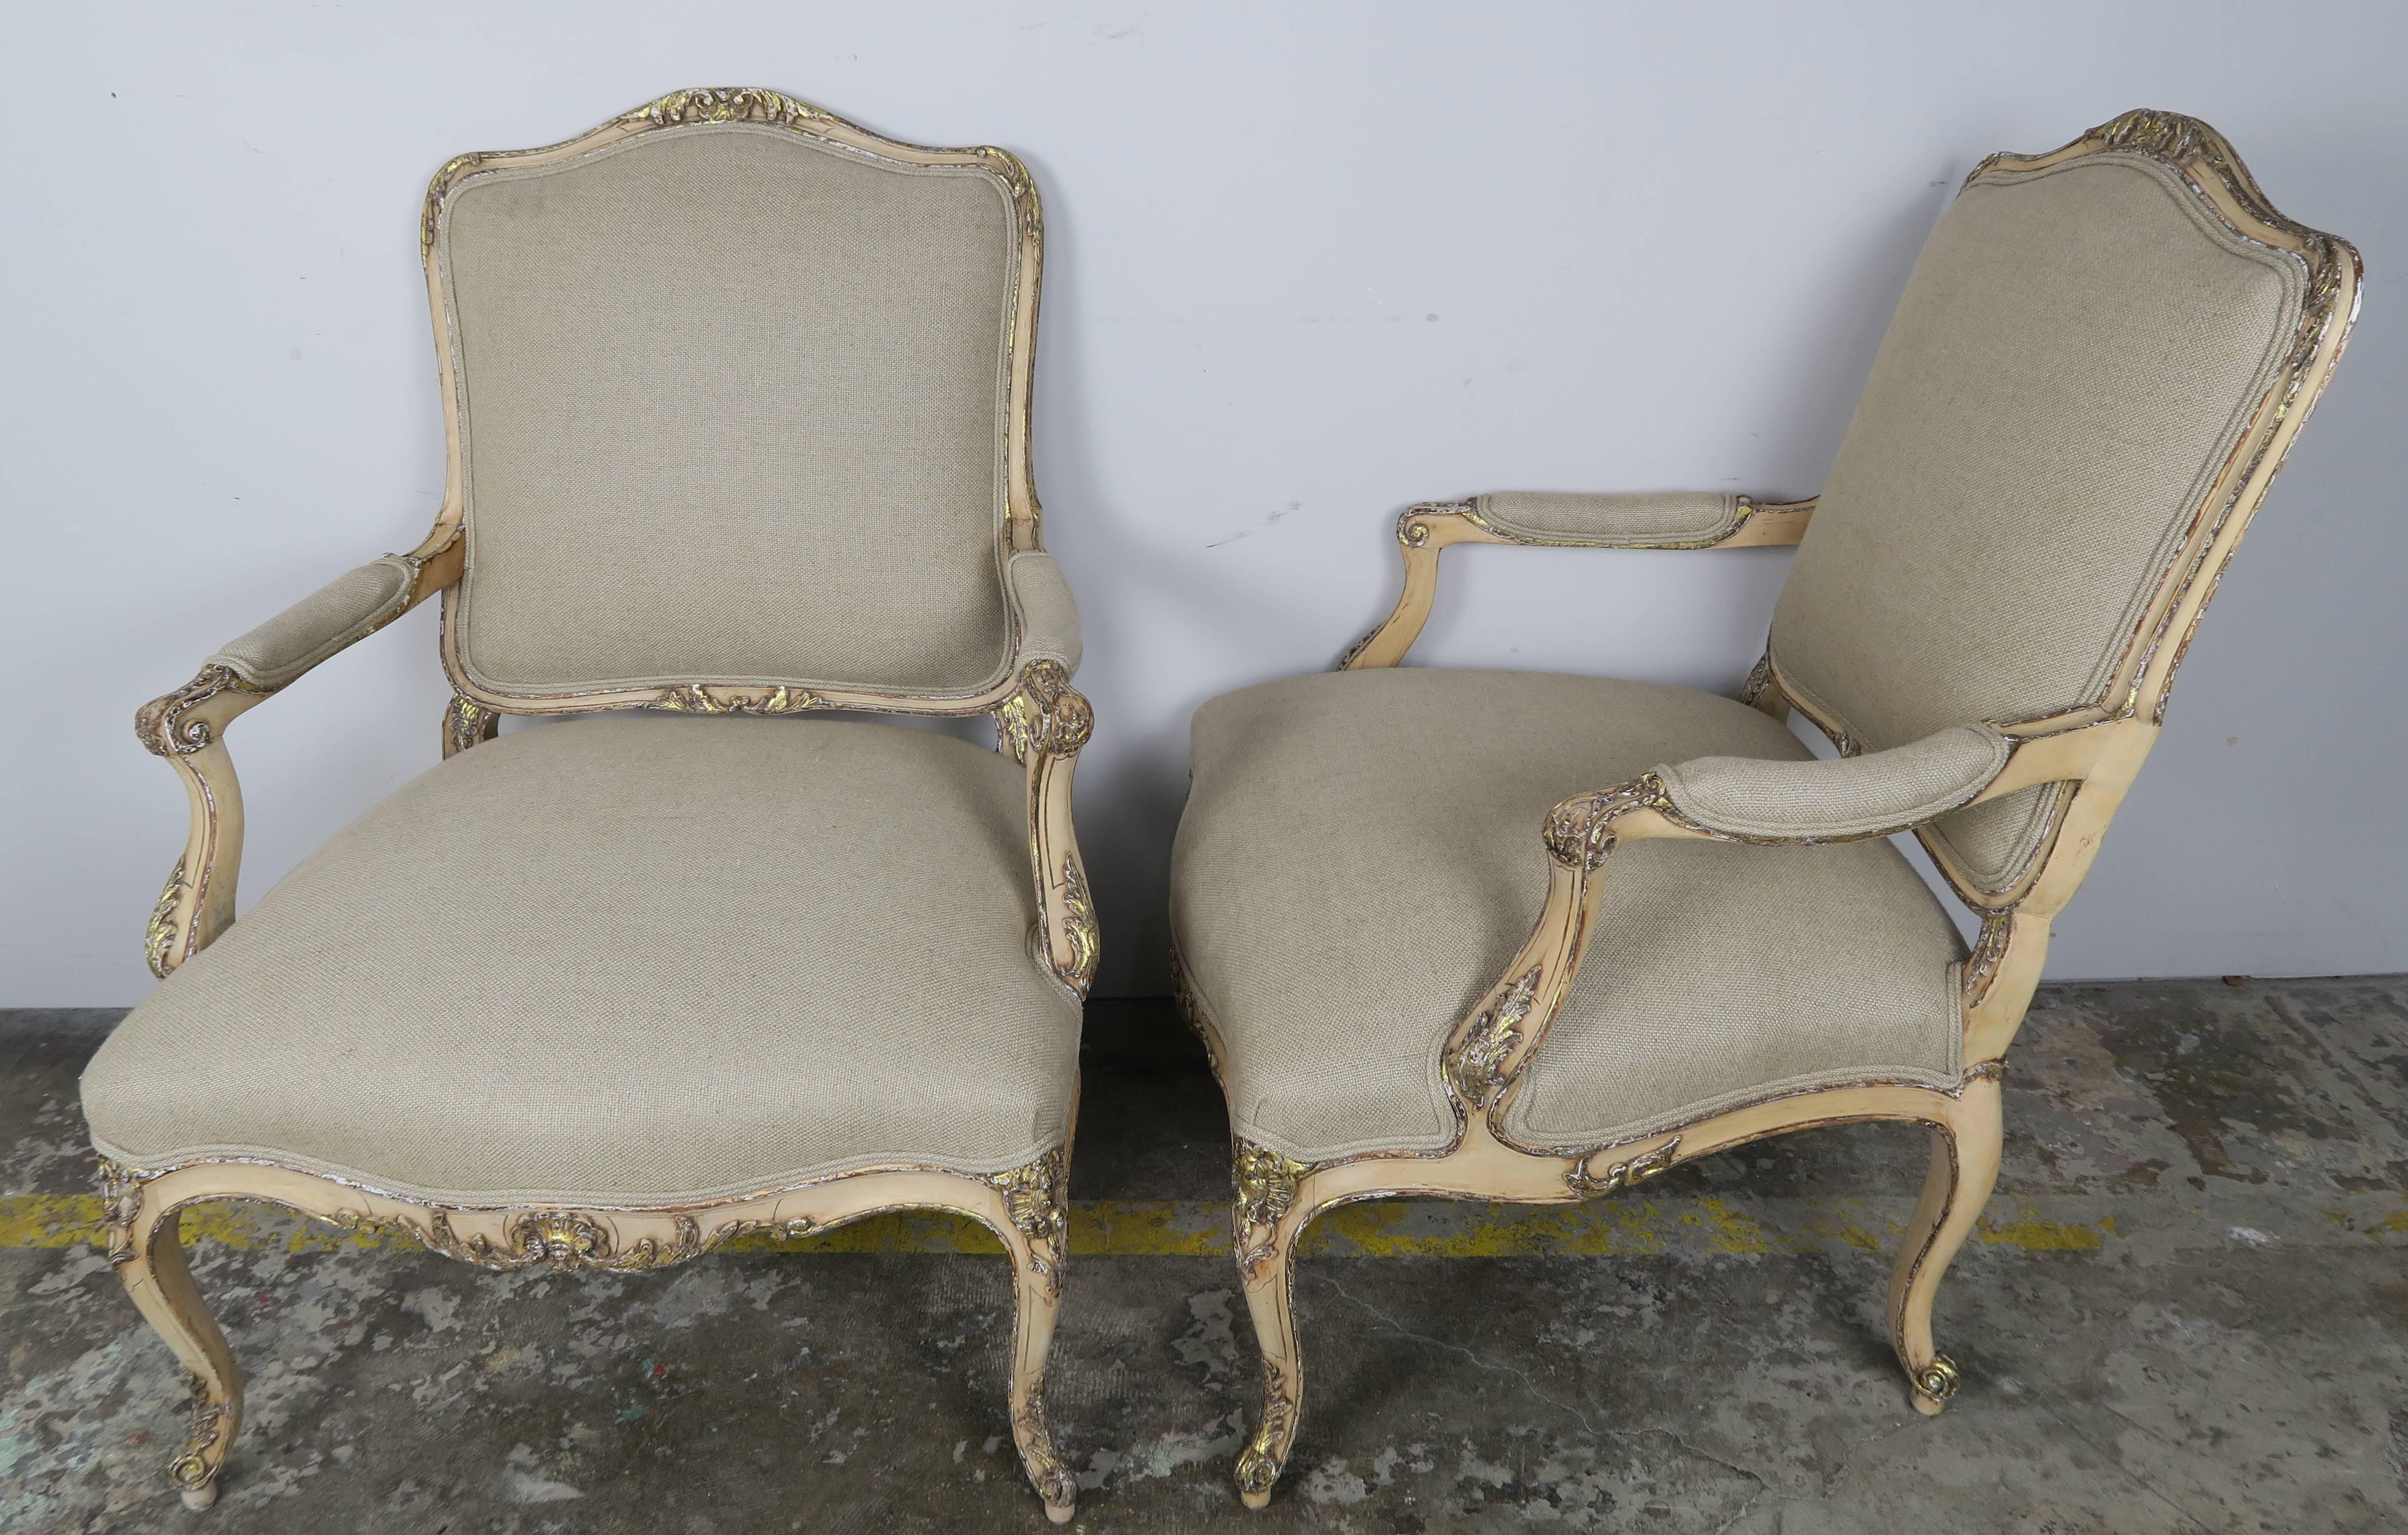 Pair of French carved Louis XV style natural walnut and parcel silver gilt armchairs standing on cabriole legs with ram's head feet. Newly upholstered in a Belgium linen with double self cording.